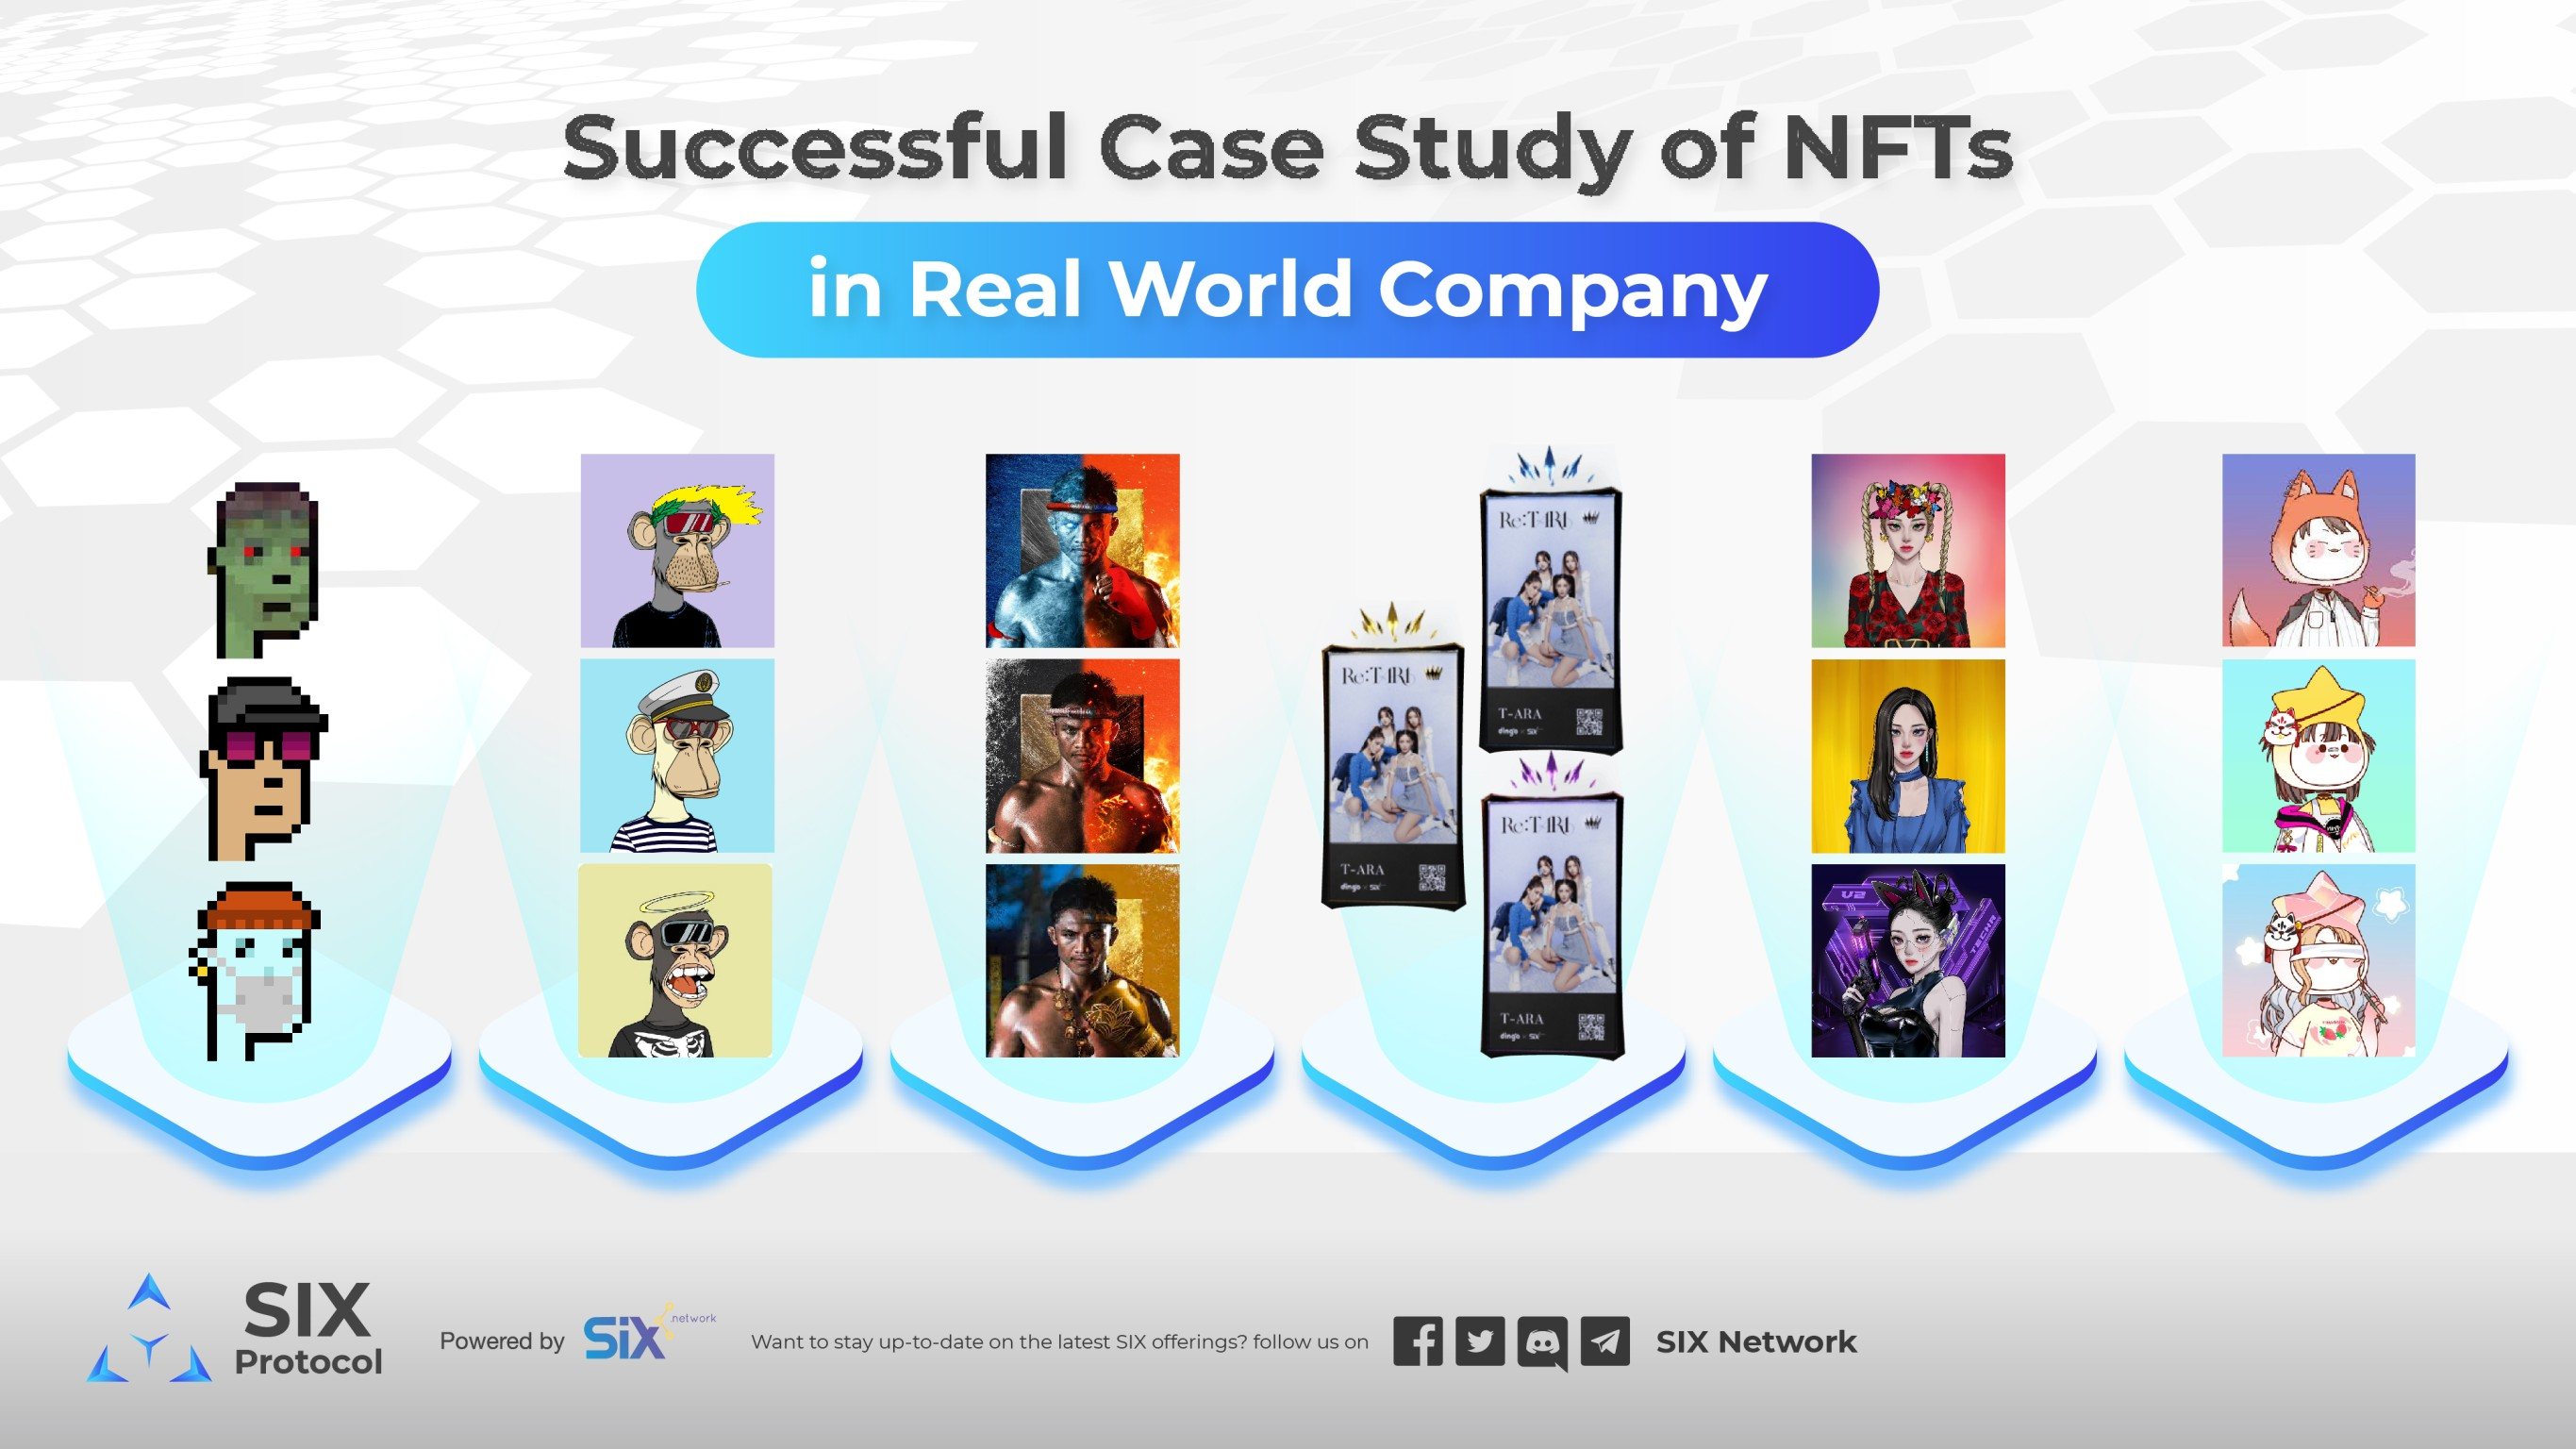 The Case Study of NFTs and Logical Endorsement of Real World Company